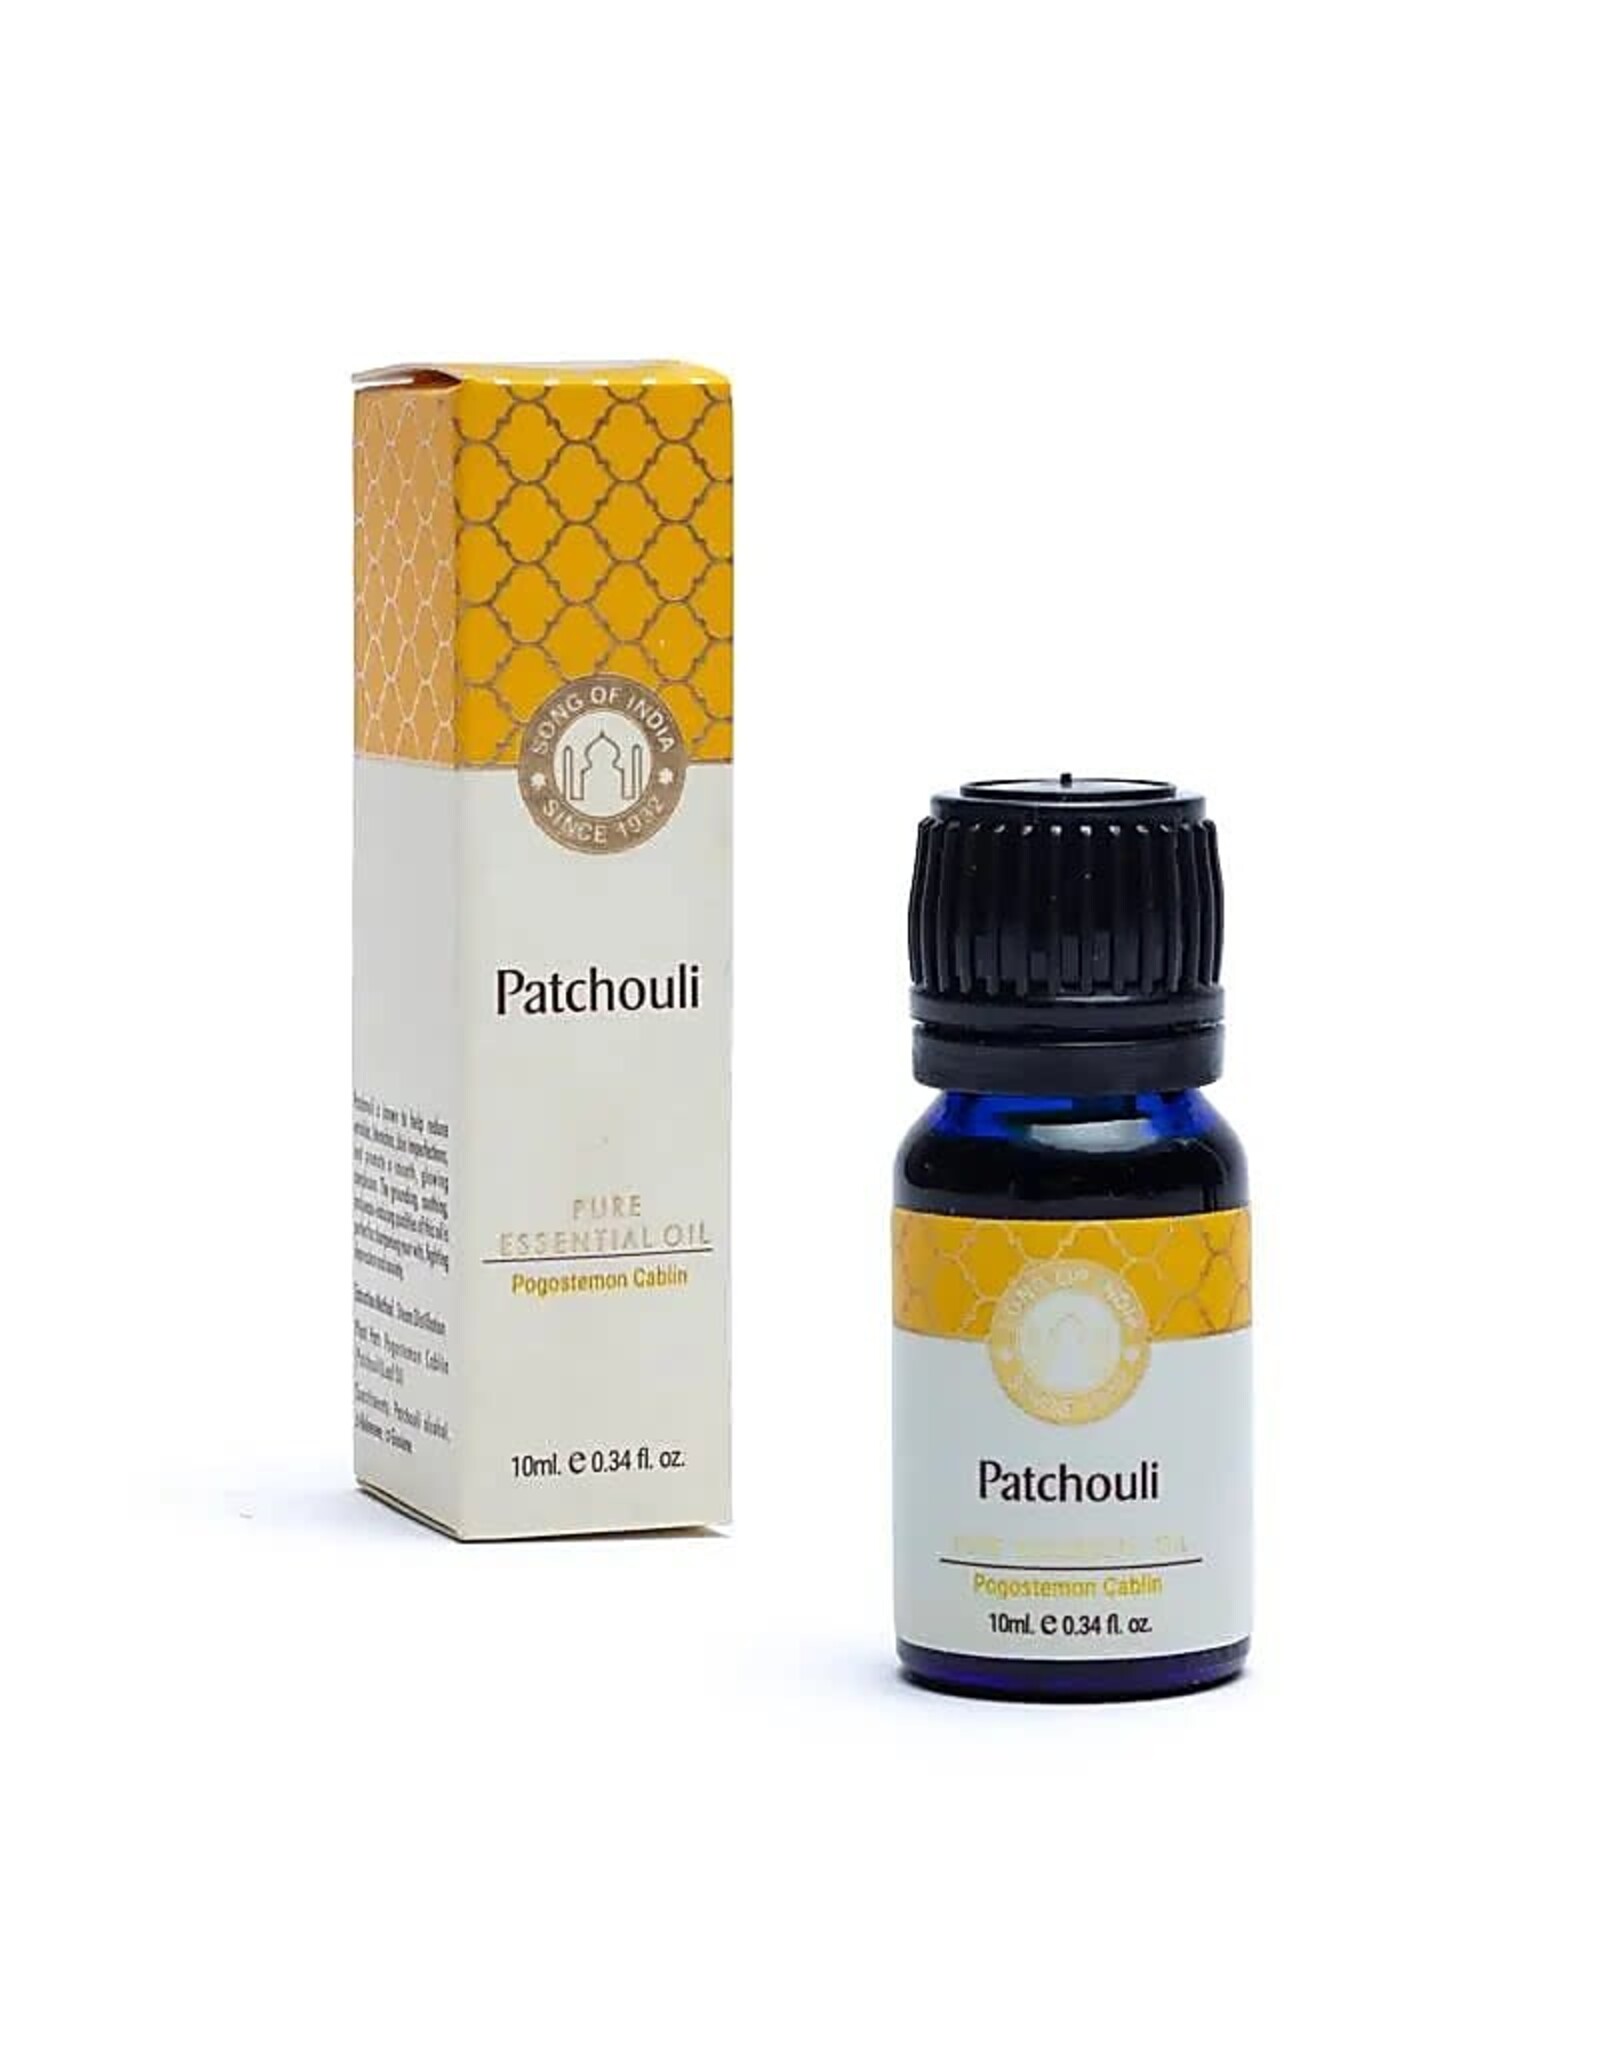 Song of India Patchouli